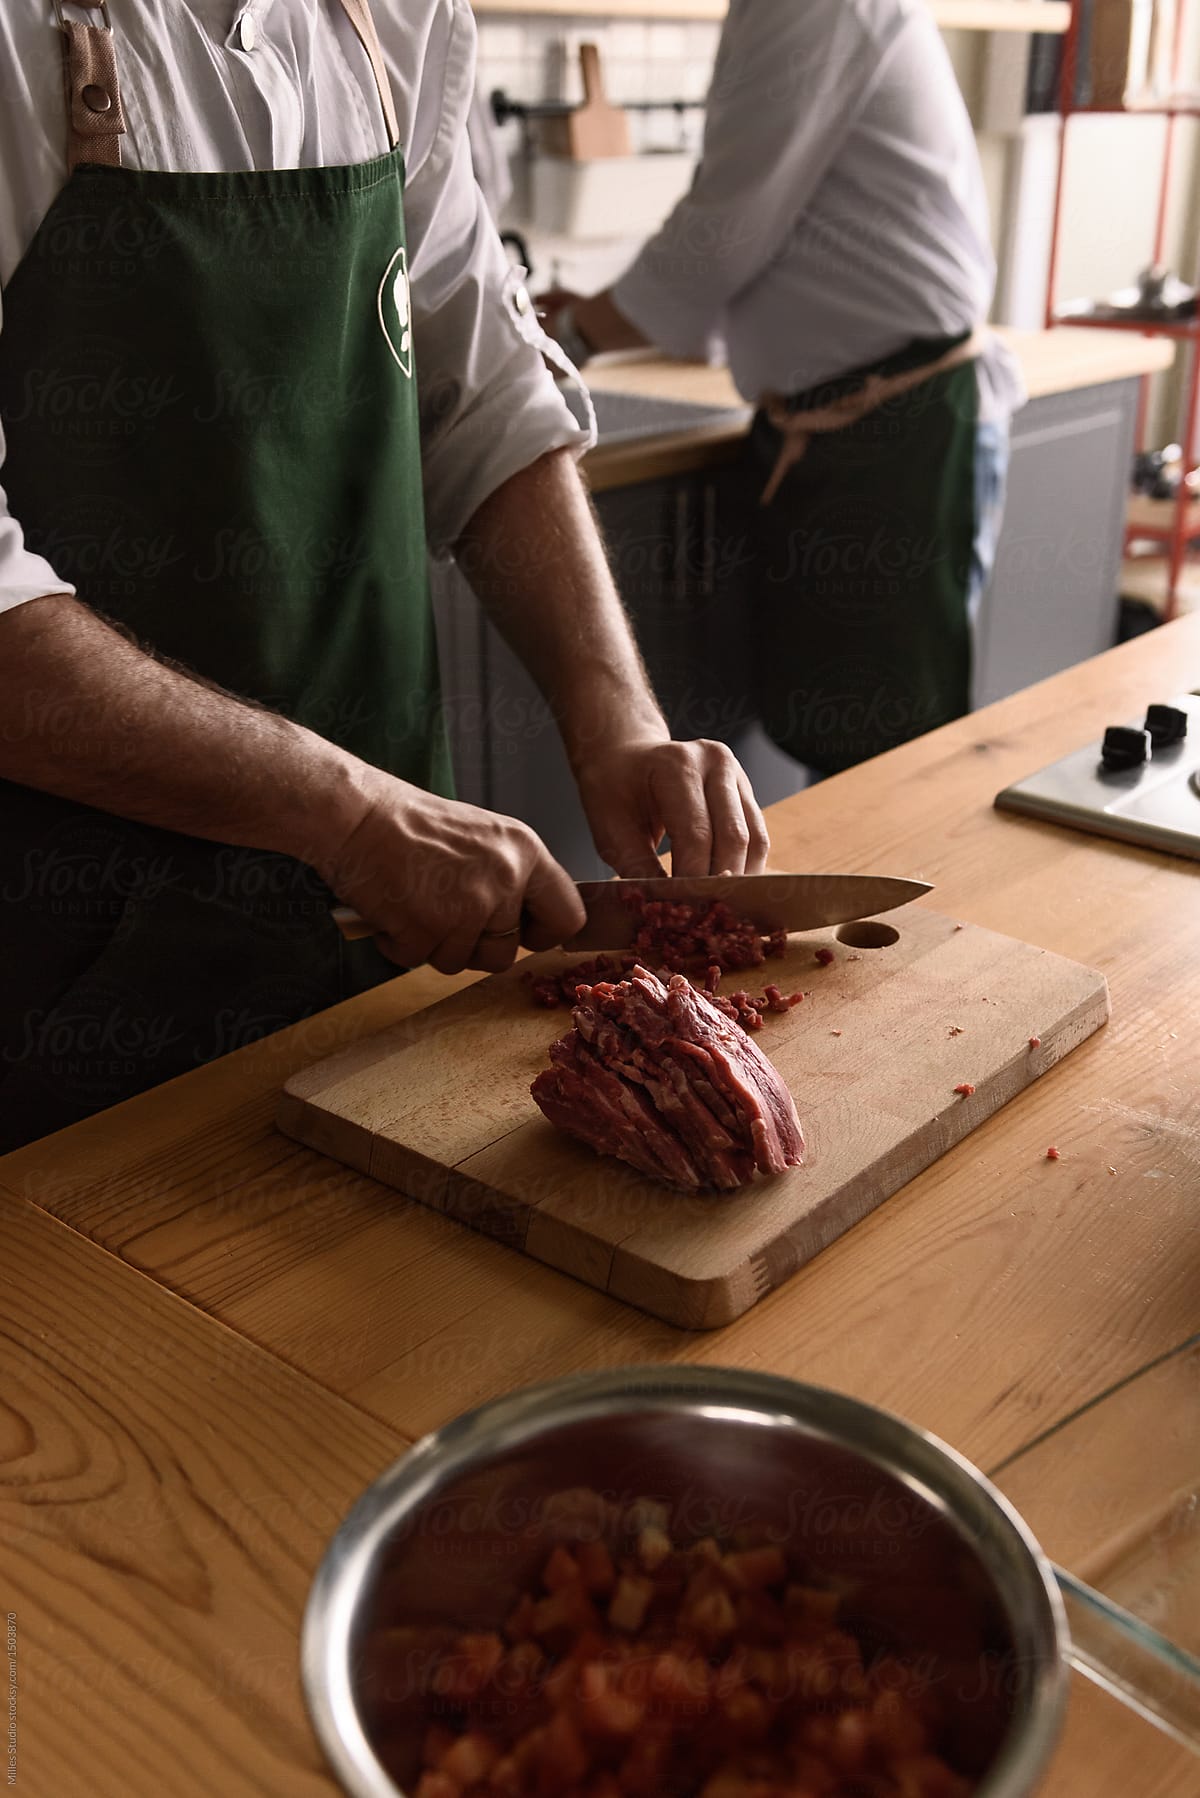 Cook slicing meat on board